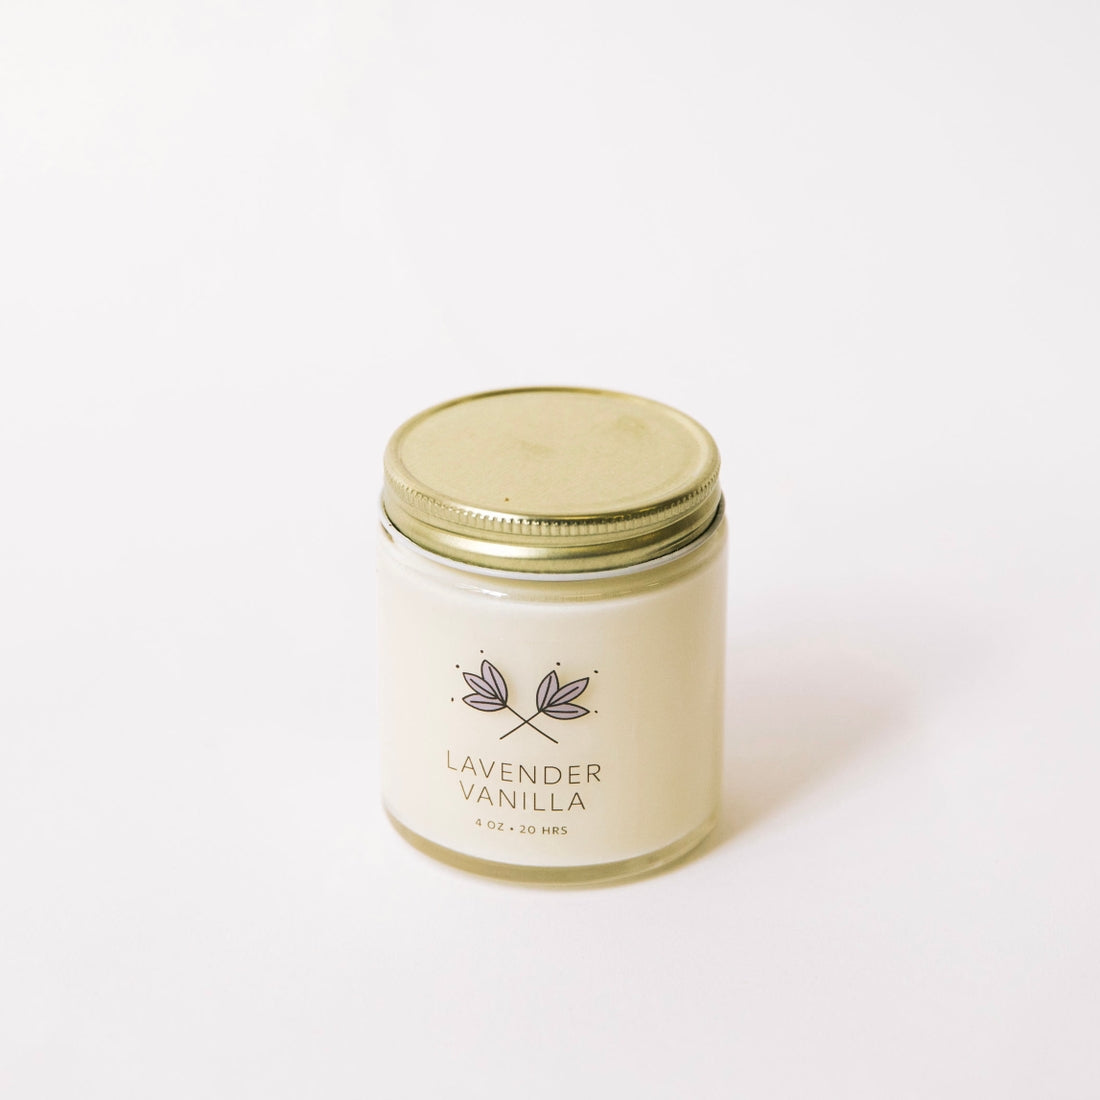 Lavender Vanilla Miniature Soy Wax Candle